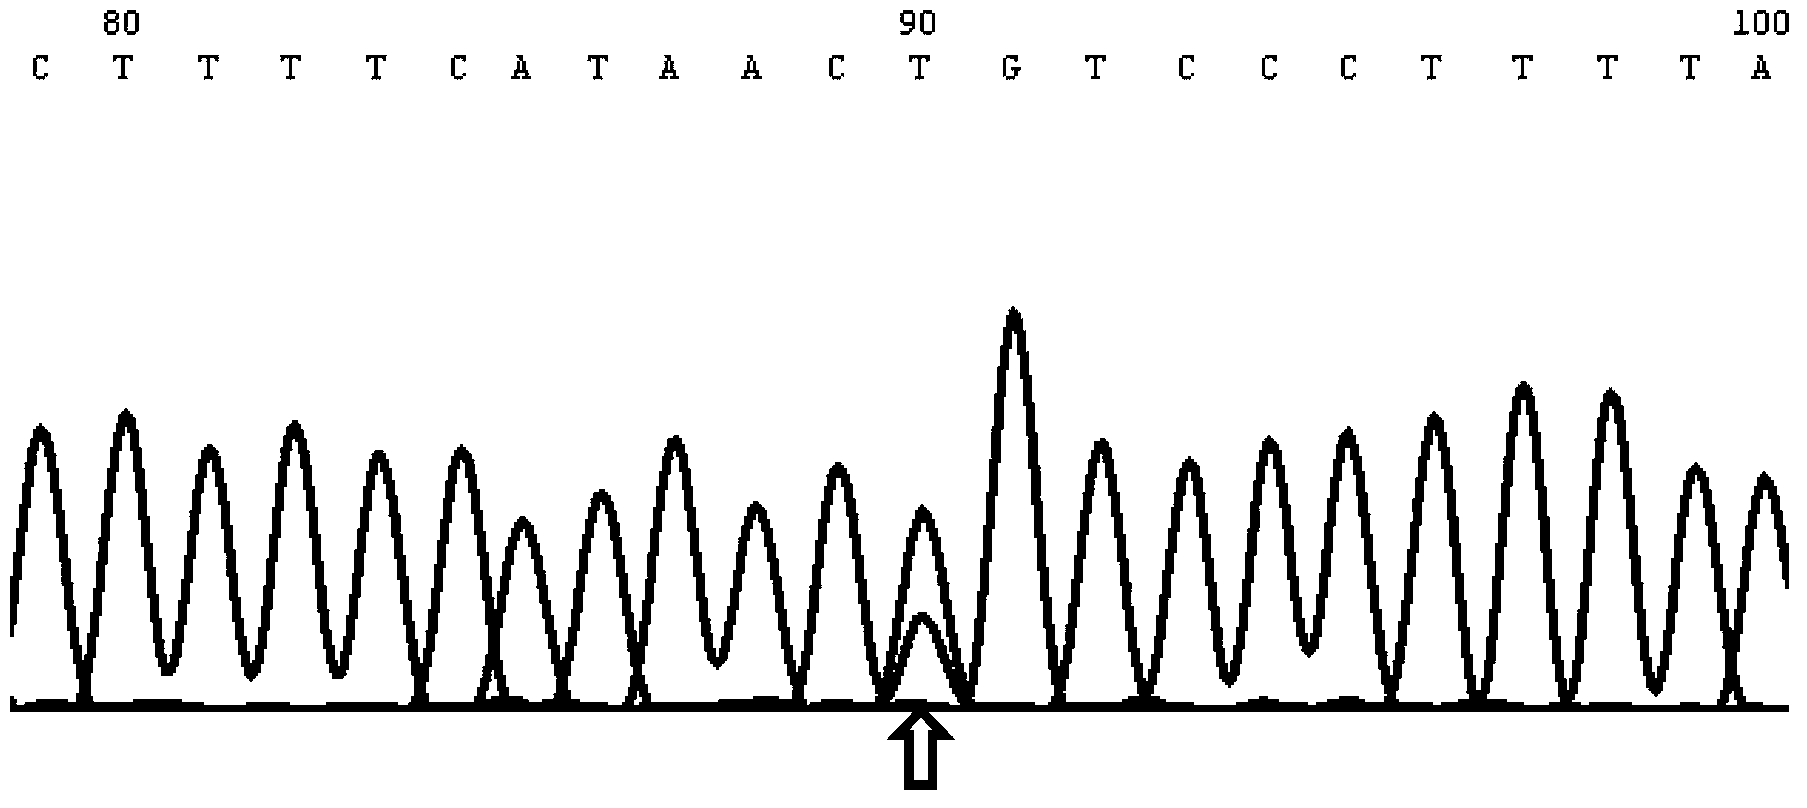 Applications of human SAMD9L gene and protein product encoded by human SAMD9L gene